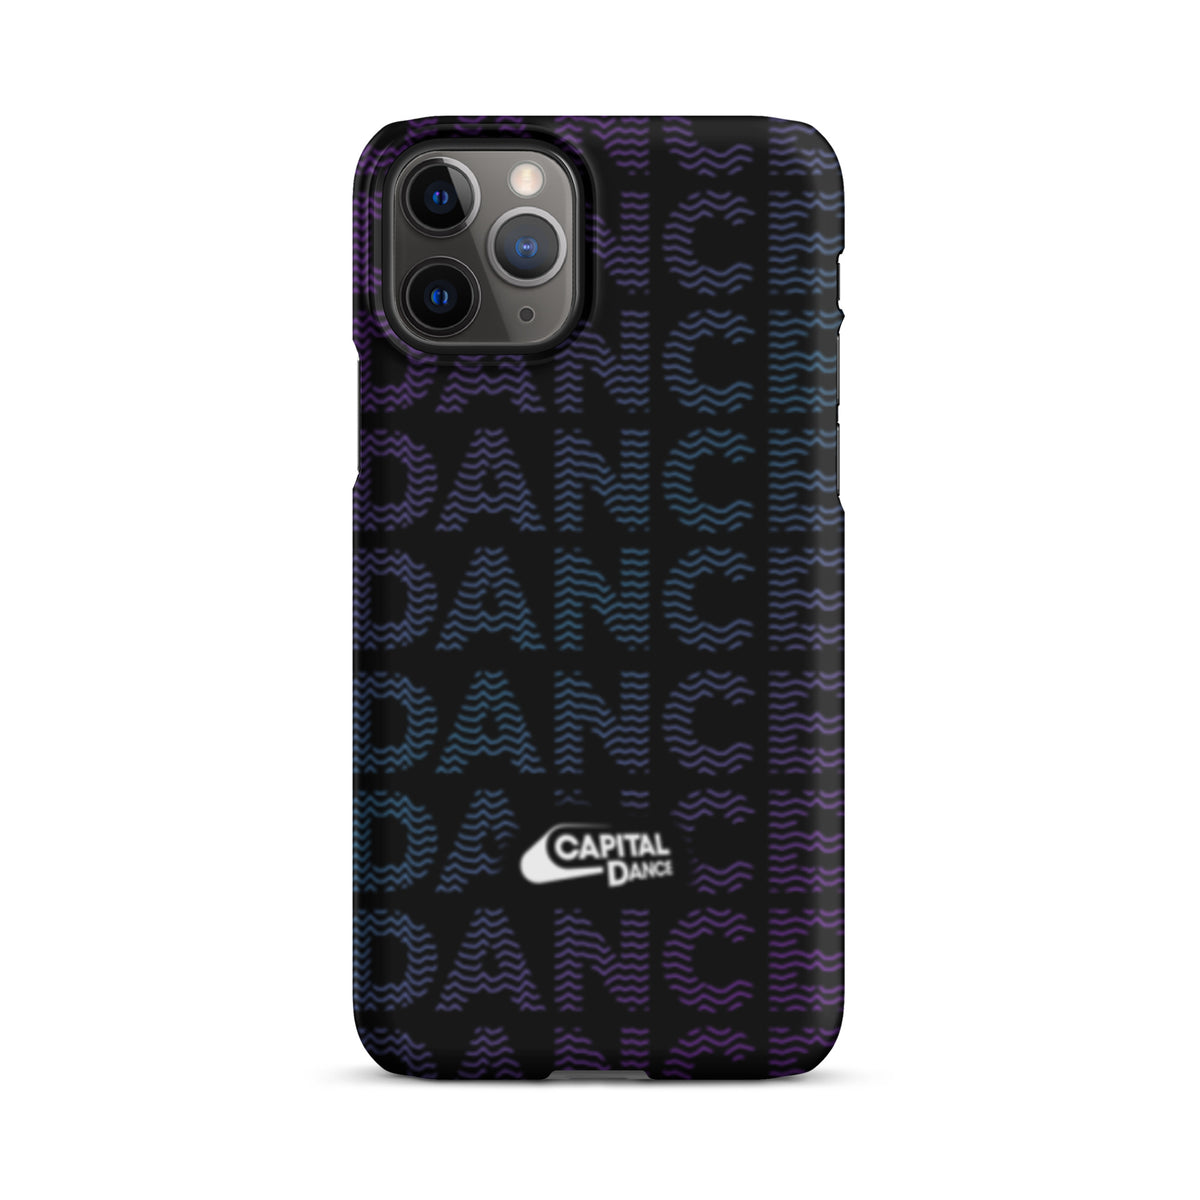 Capital Dance Snap case for iPhone®